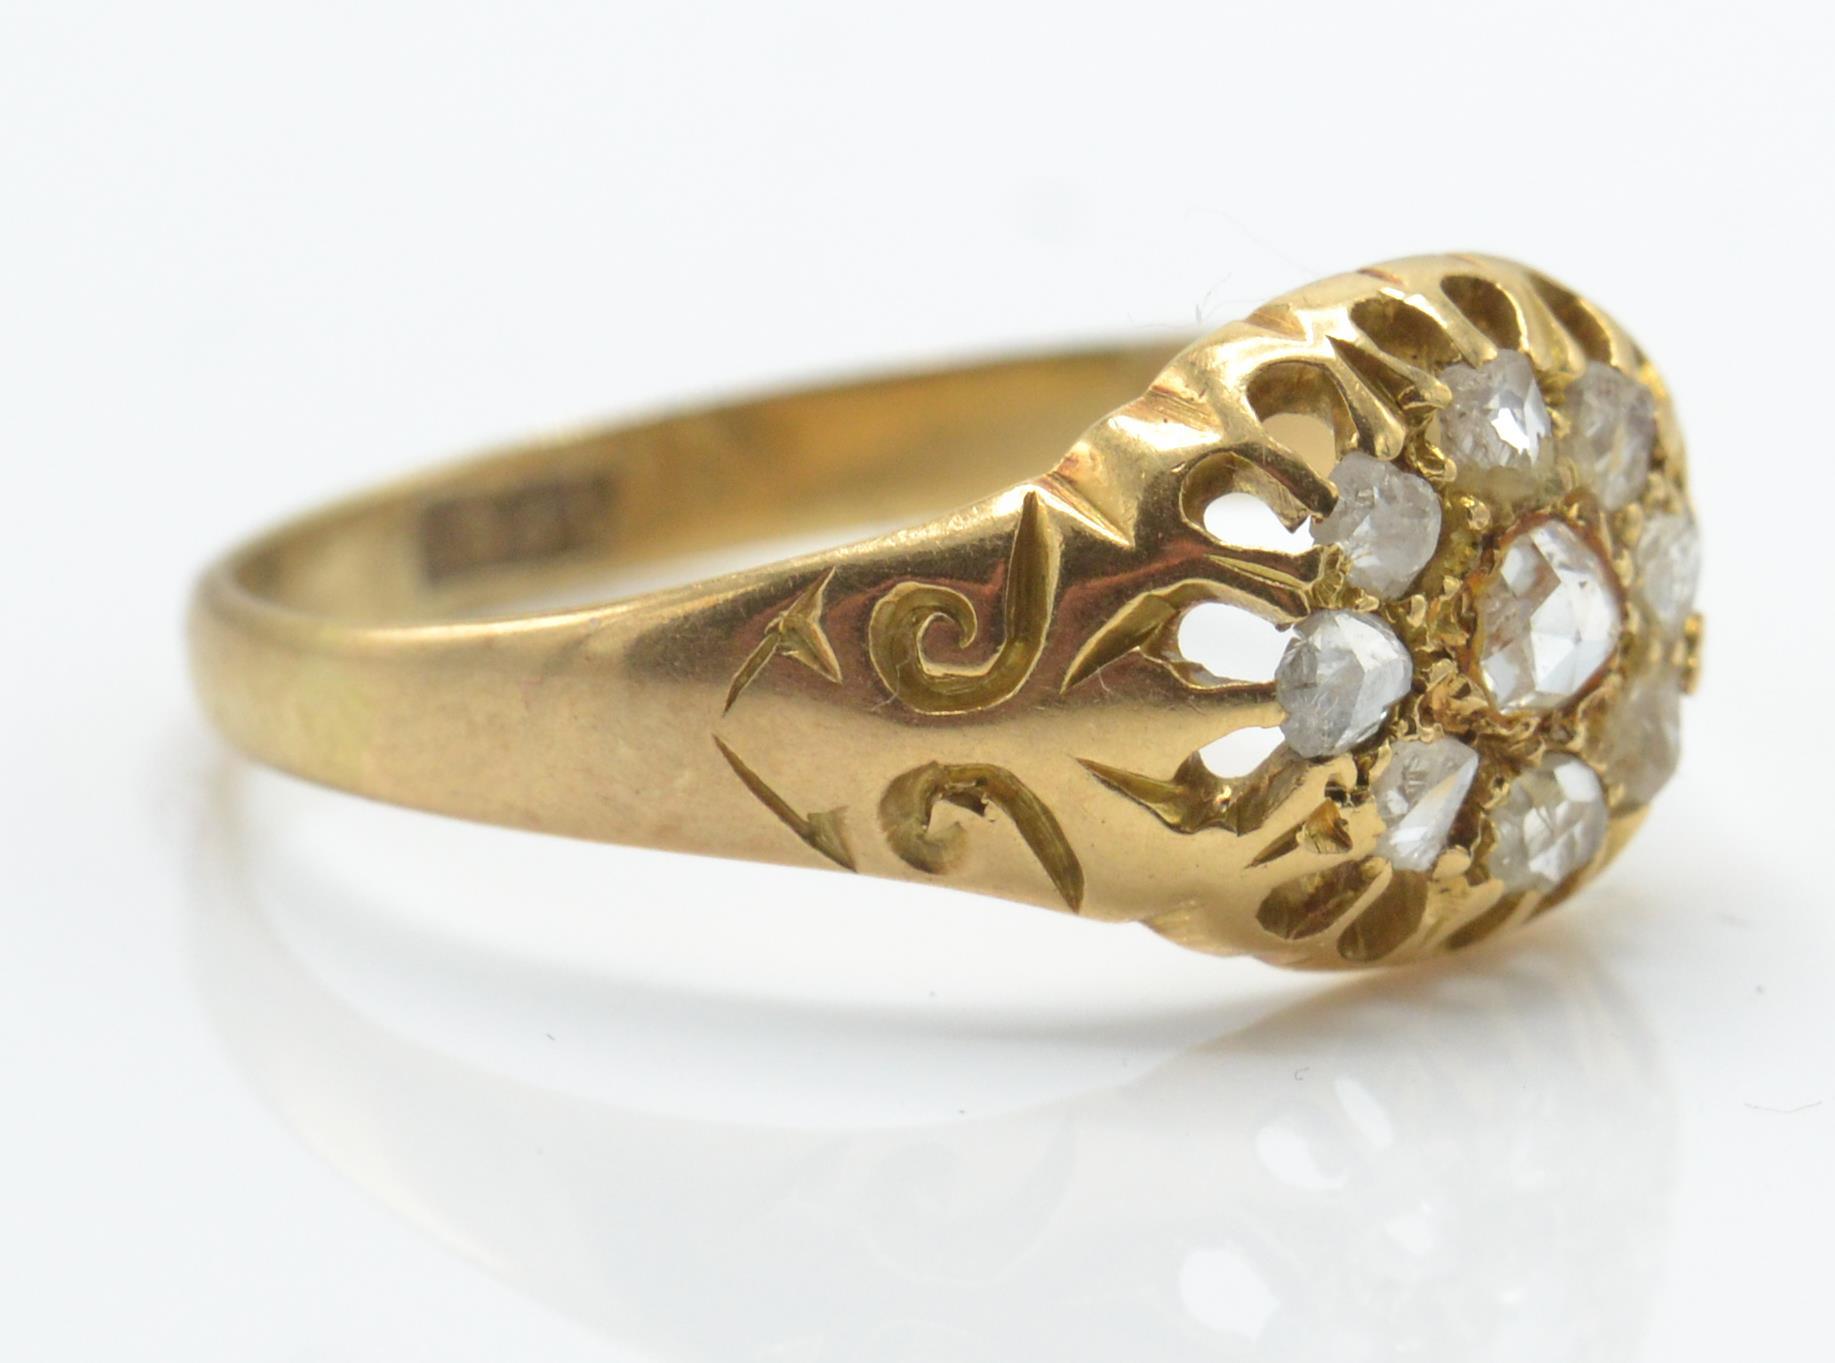 An Antique 18ct Gold & Diamond Cluster Ring - Image 2 of 4